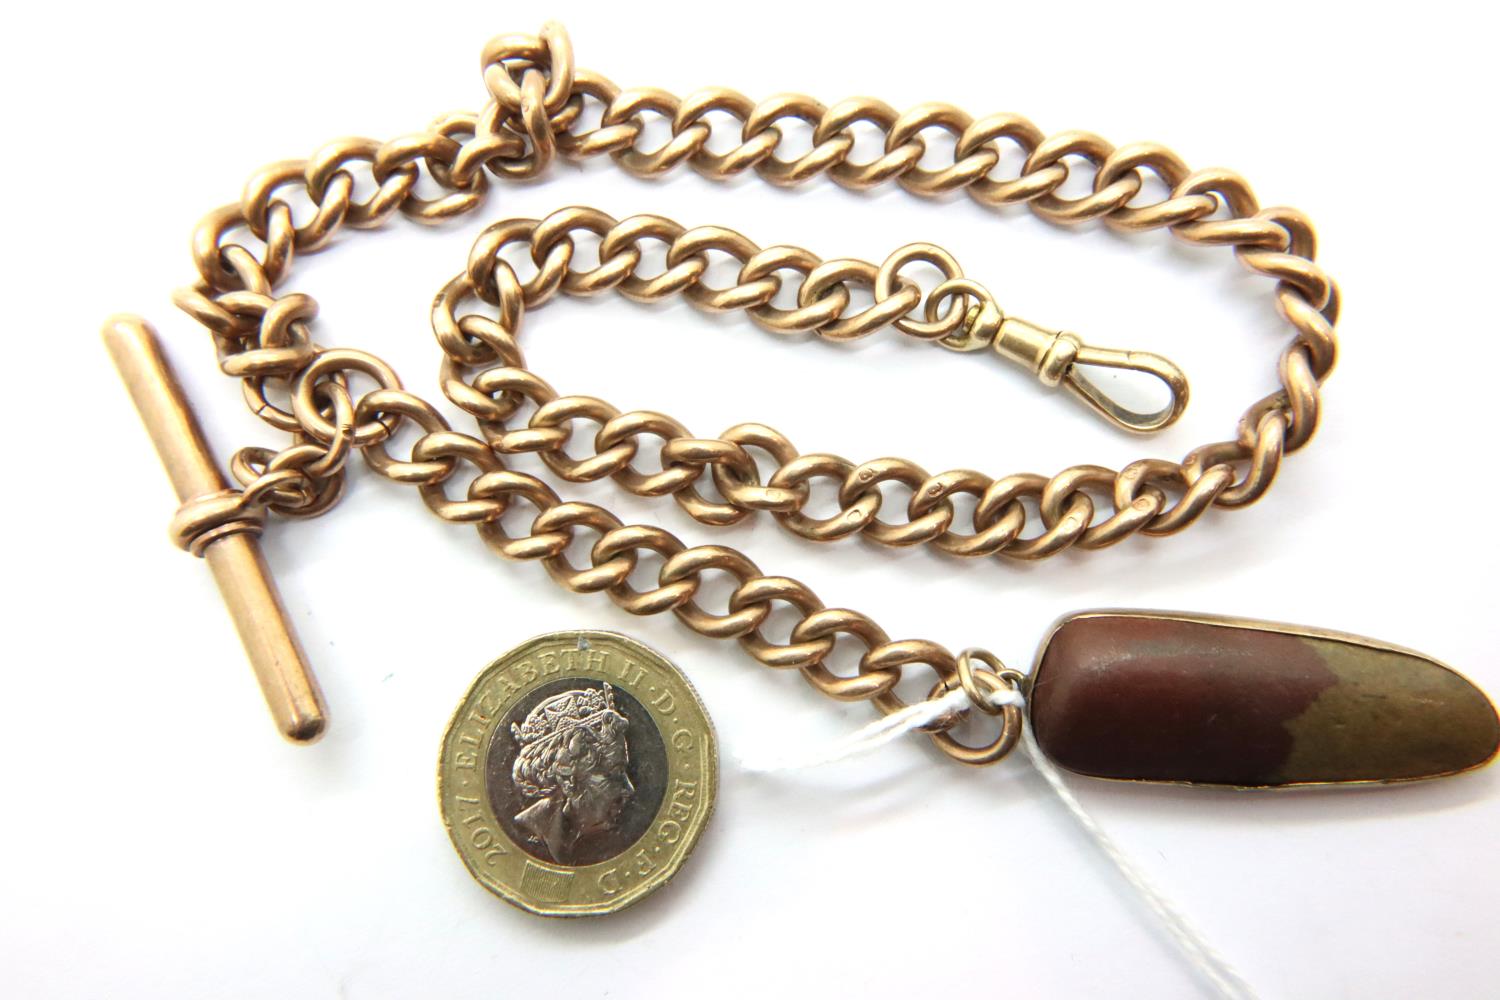 9ct gold pocket watch chain with claw clasp, T bar and stone fob, fob weight 6.0g, combined 54.9g.